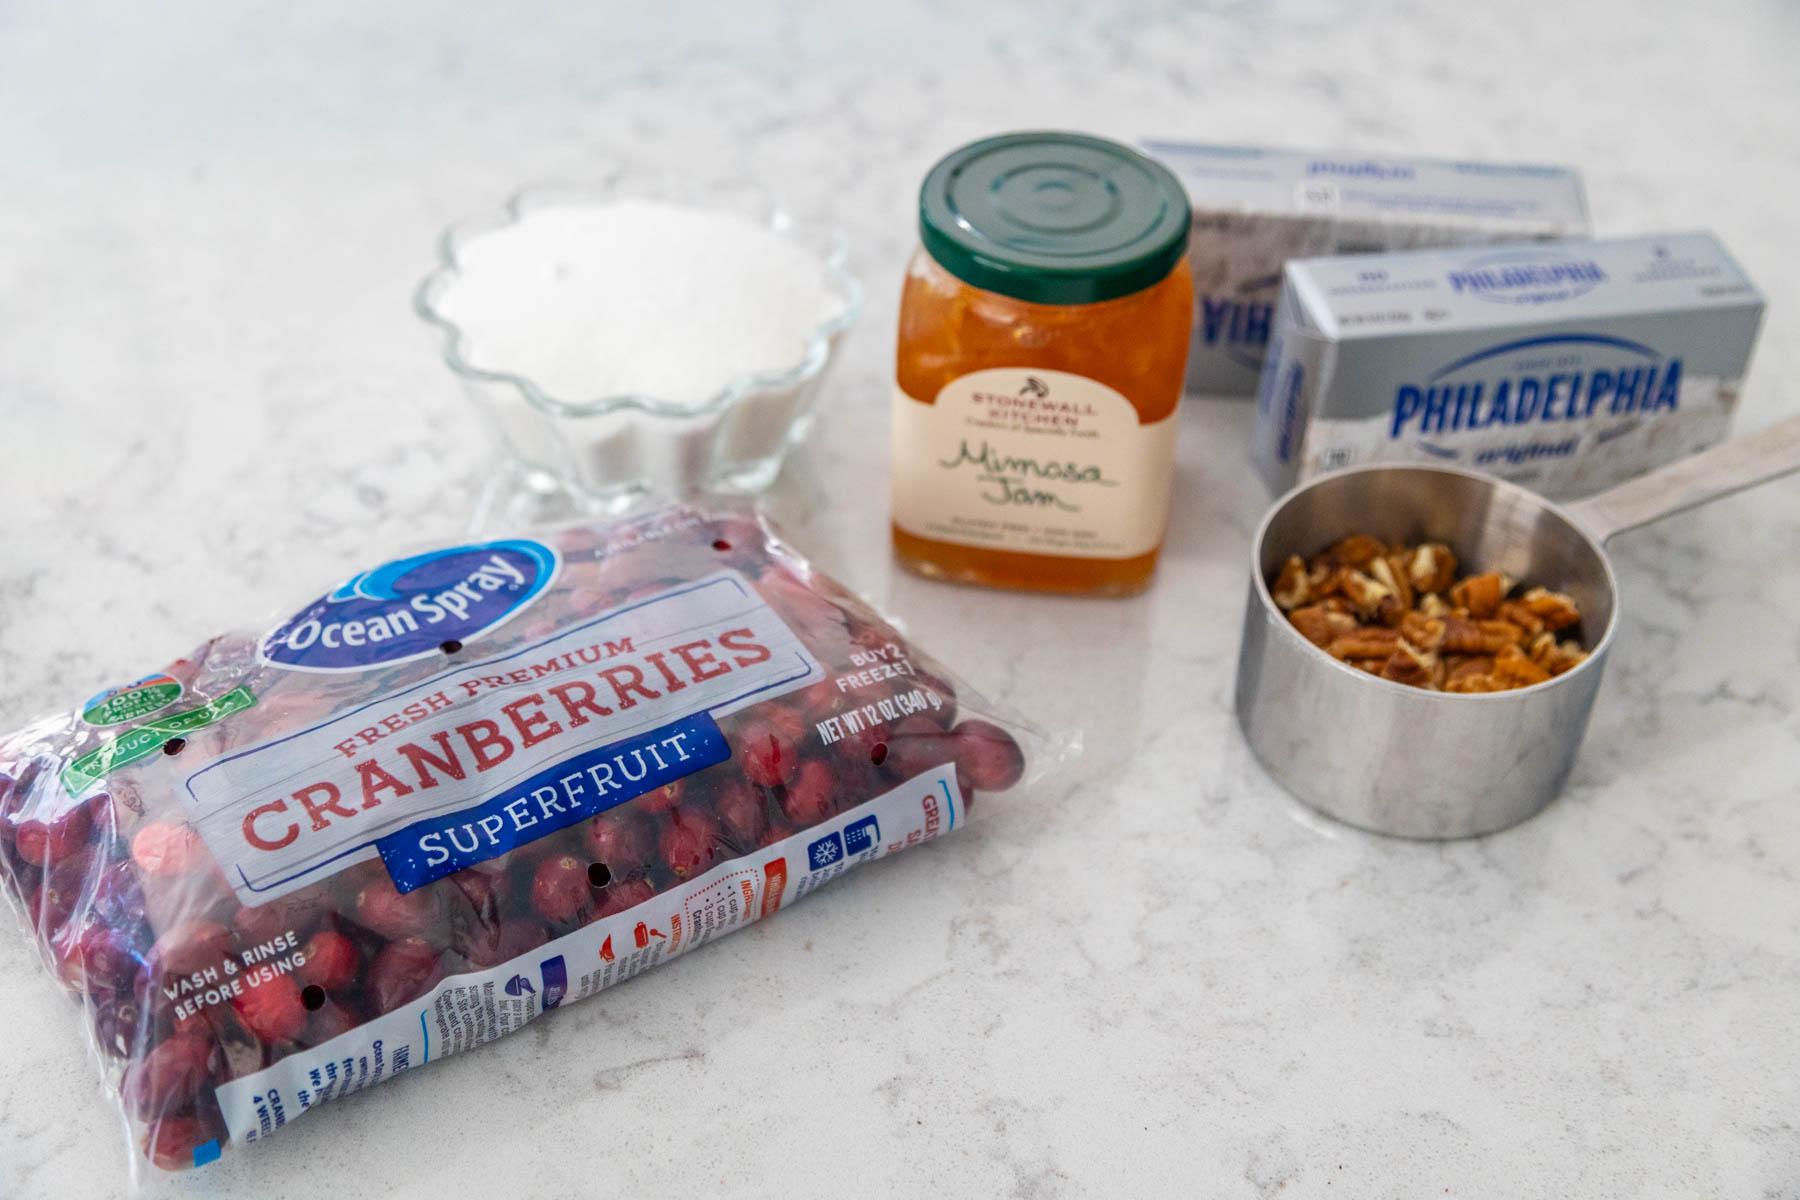 The fresh cranberries, jam, pecans, and cream cheese are on the counter.